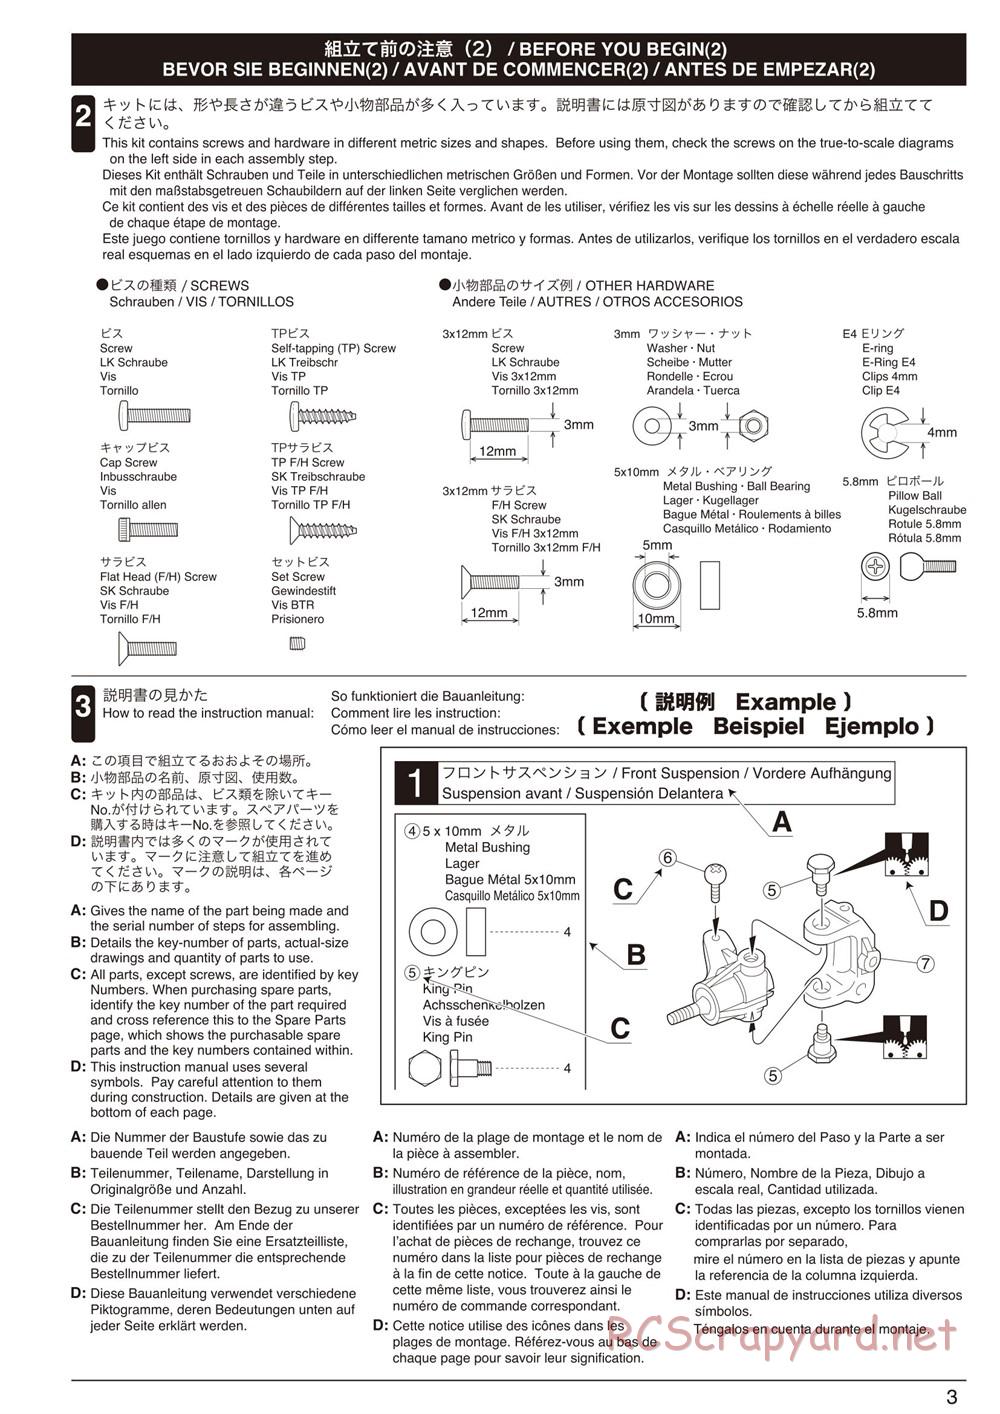 Kyosho - Inferno Neo 2.0 - Manual - Page 3